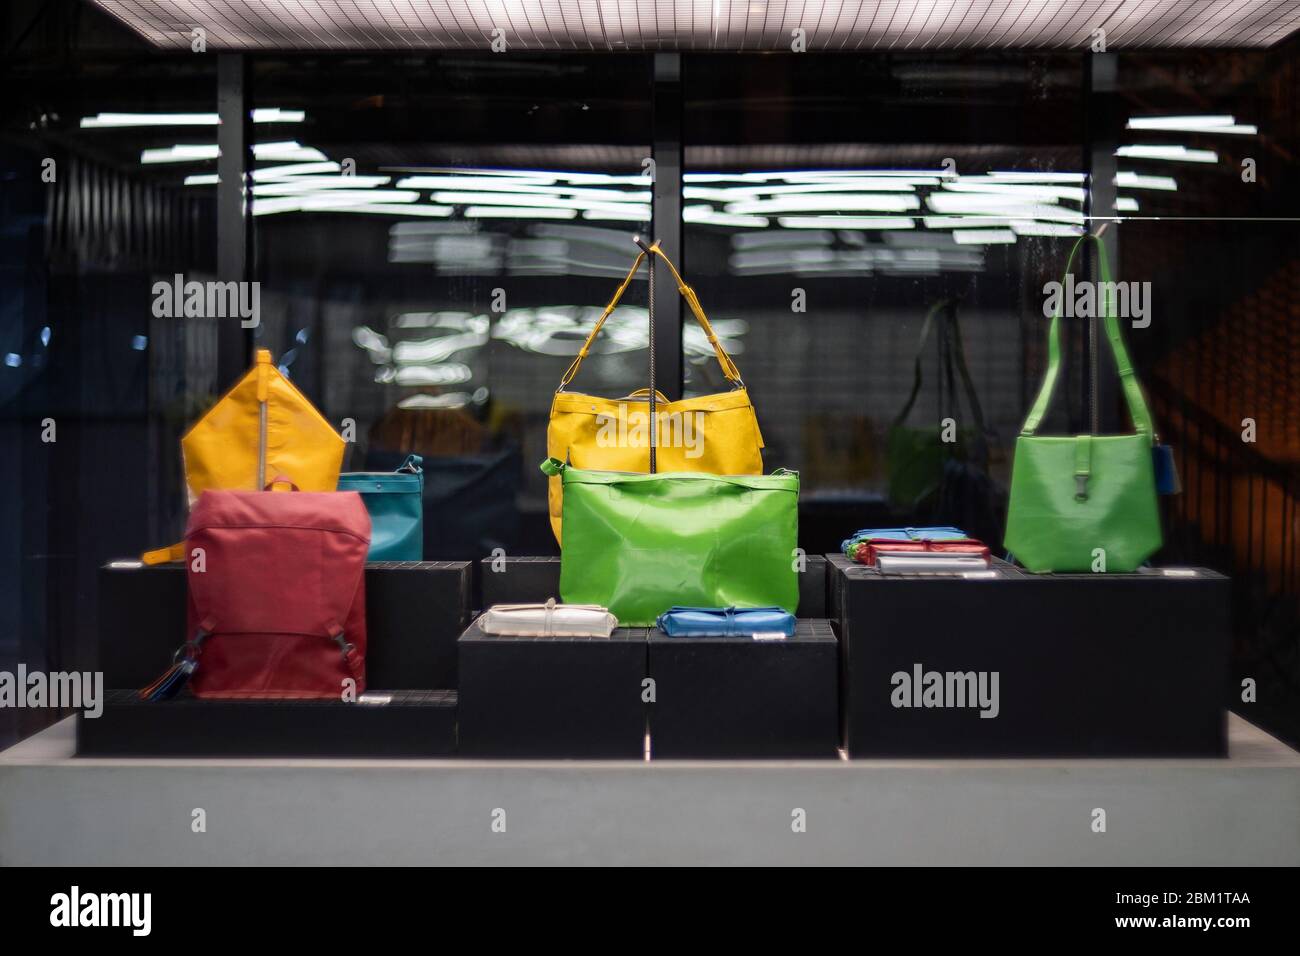 SHANGHAI, CHINA - NOVEMBER 28, 2018. Retro film photo with blurred background. Fashionable colourful bags made from recycled materials are displayed i Stock Photo